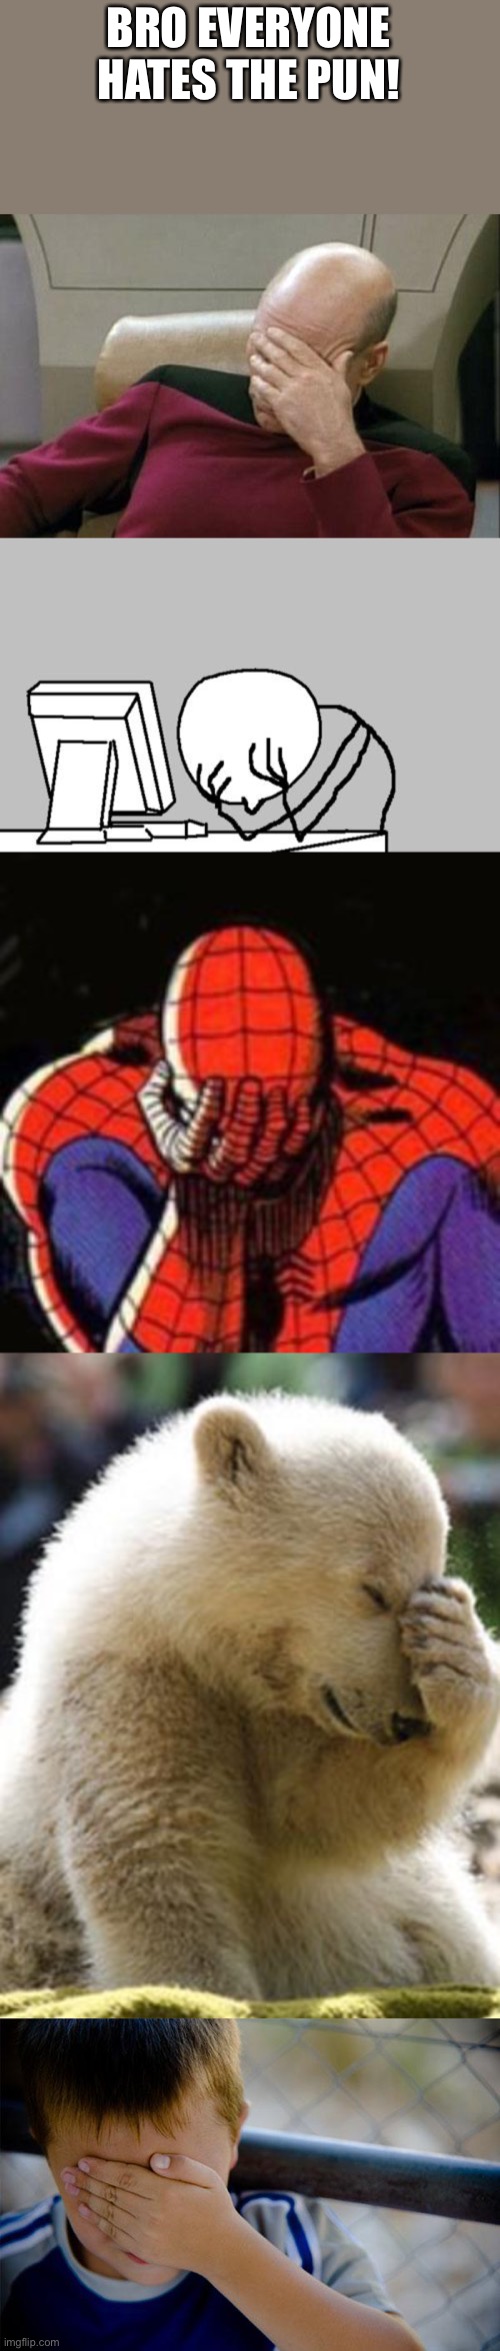 BRO EVERYONE HATES THE PUN! | image tagged in memes,captain picard facepalm,computer guy facepalm,sad spiderman,facepalm bear,confession kid | made w/ Imgflip meme maker